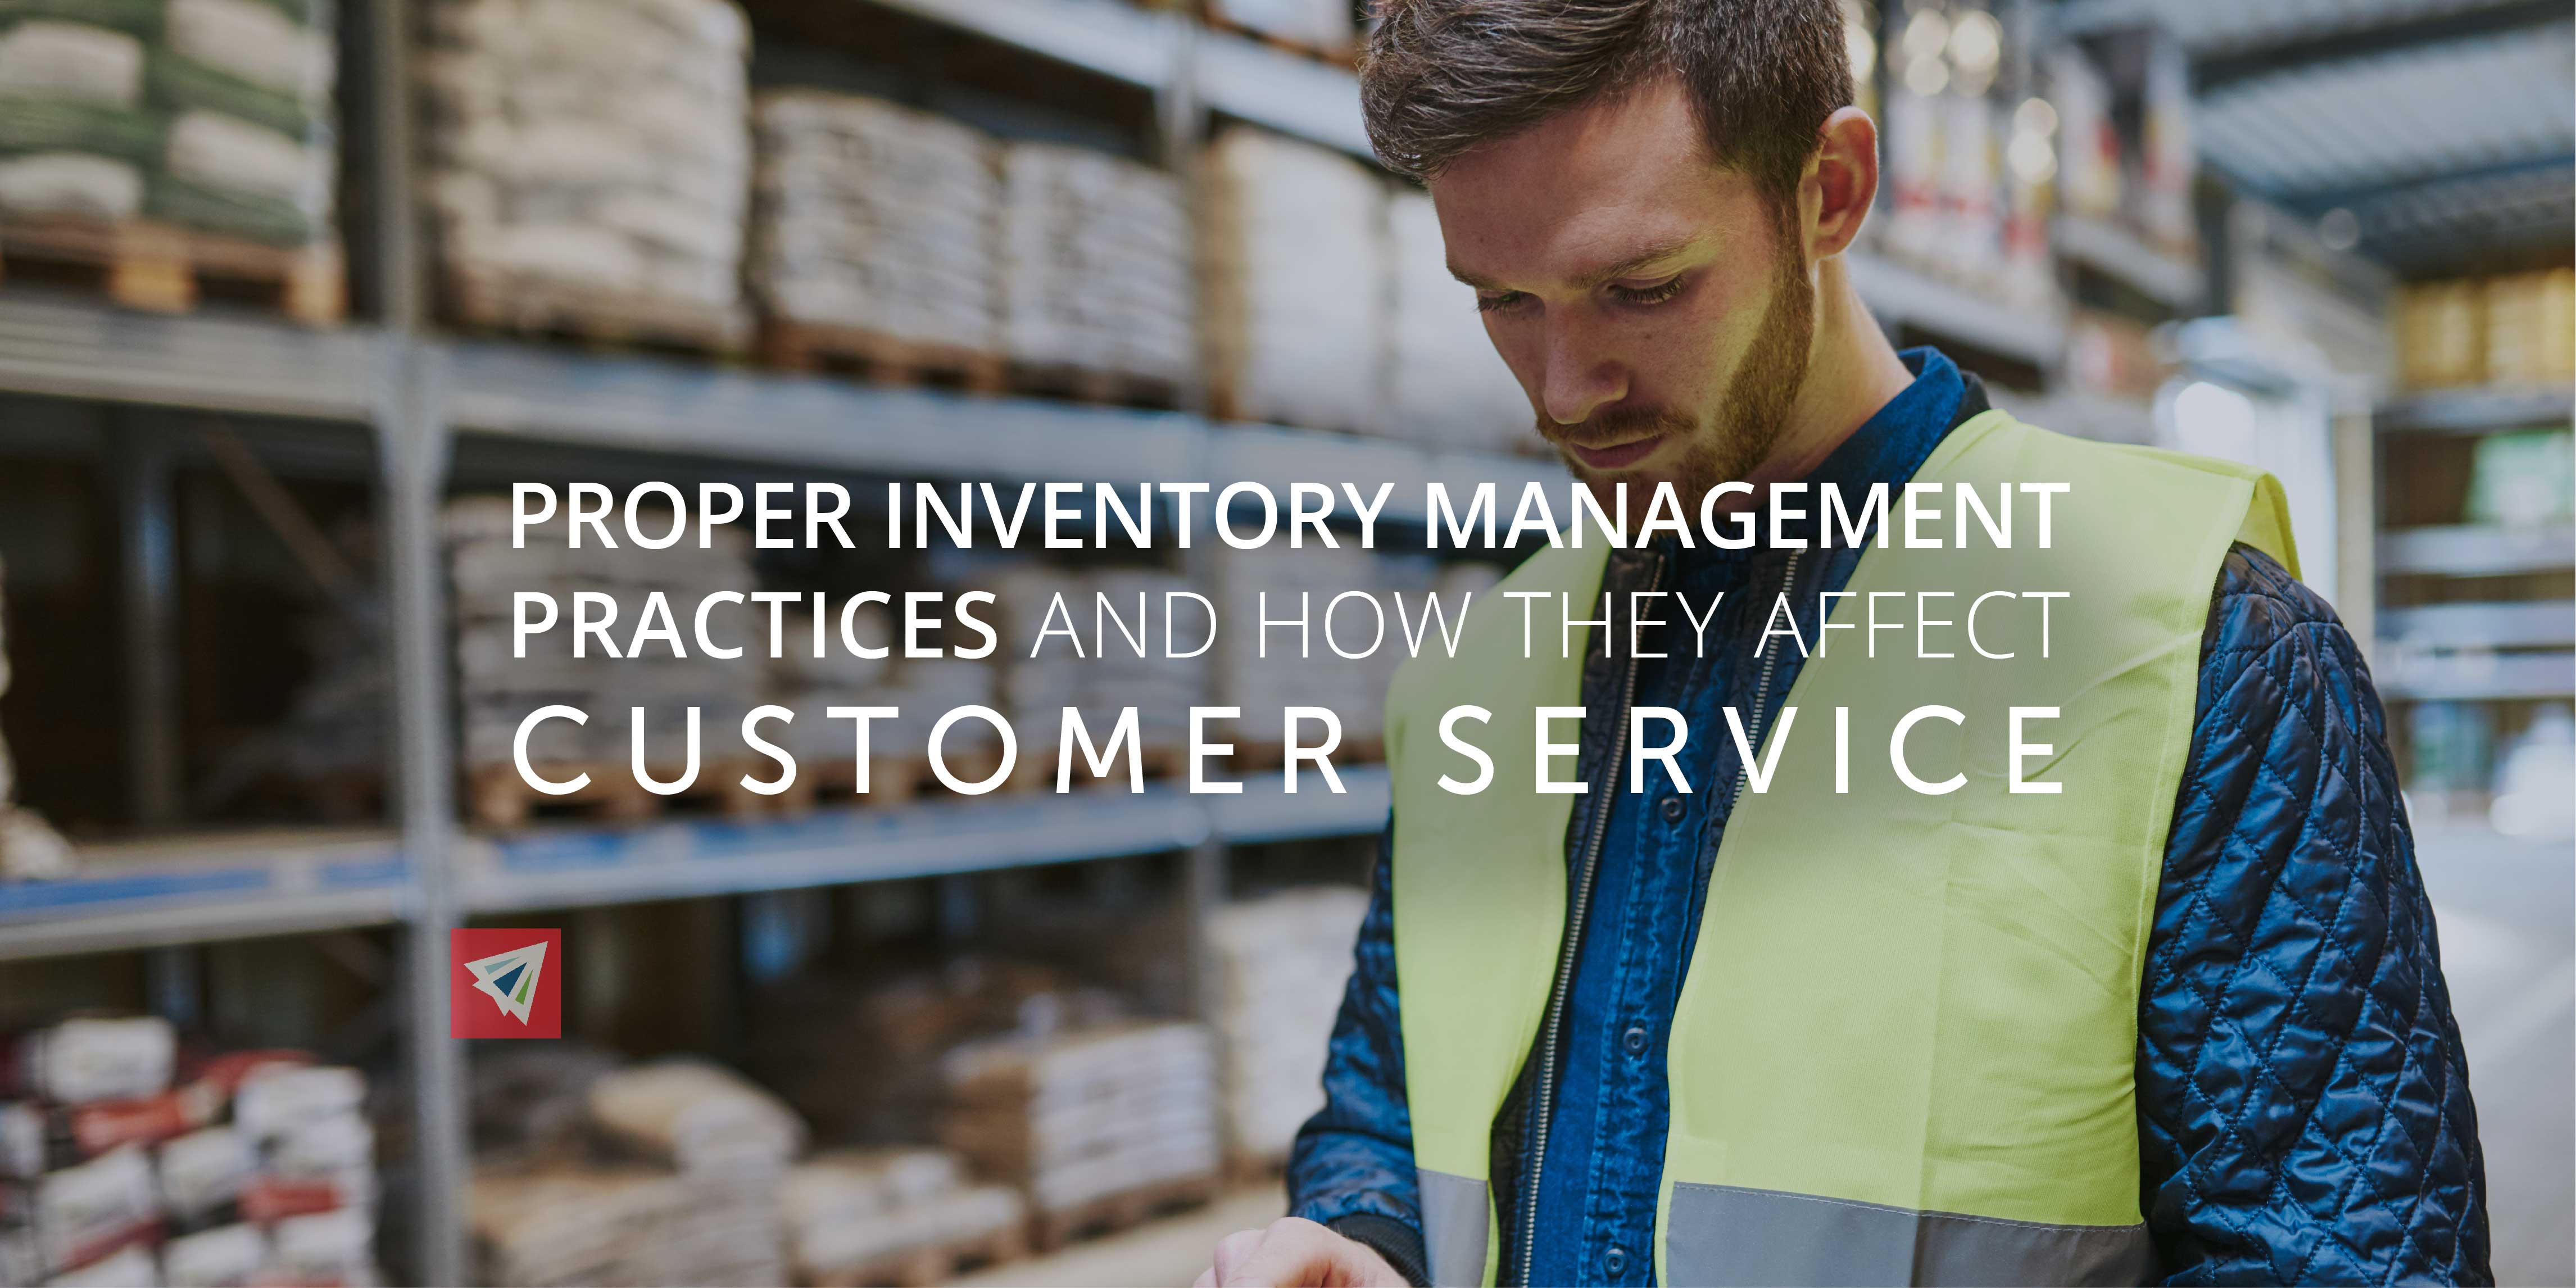 Proper Inventory Management Practices - How They Affect Customer Service